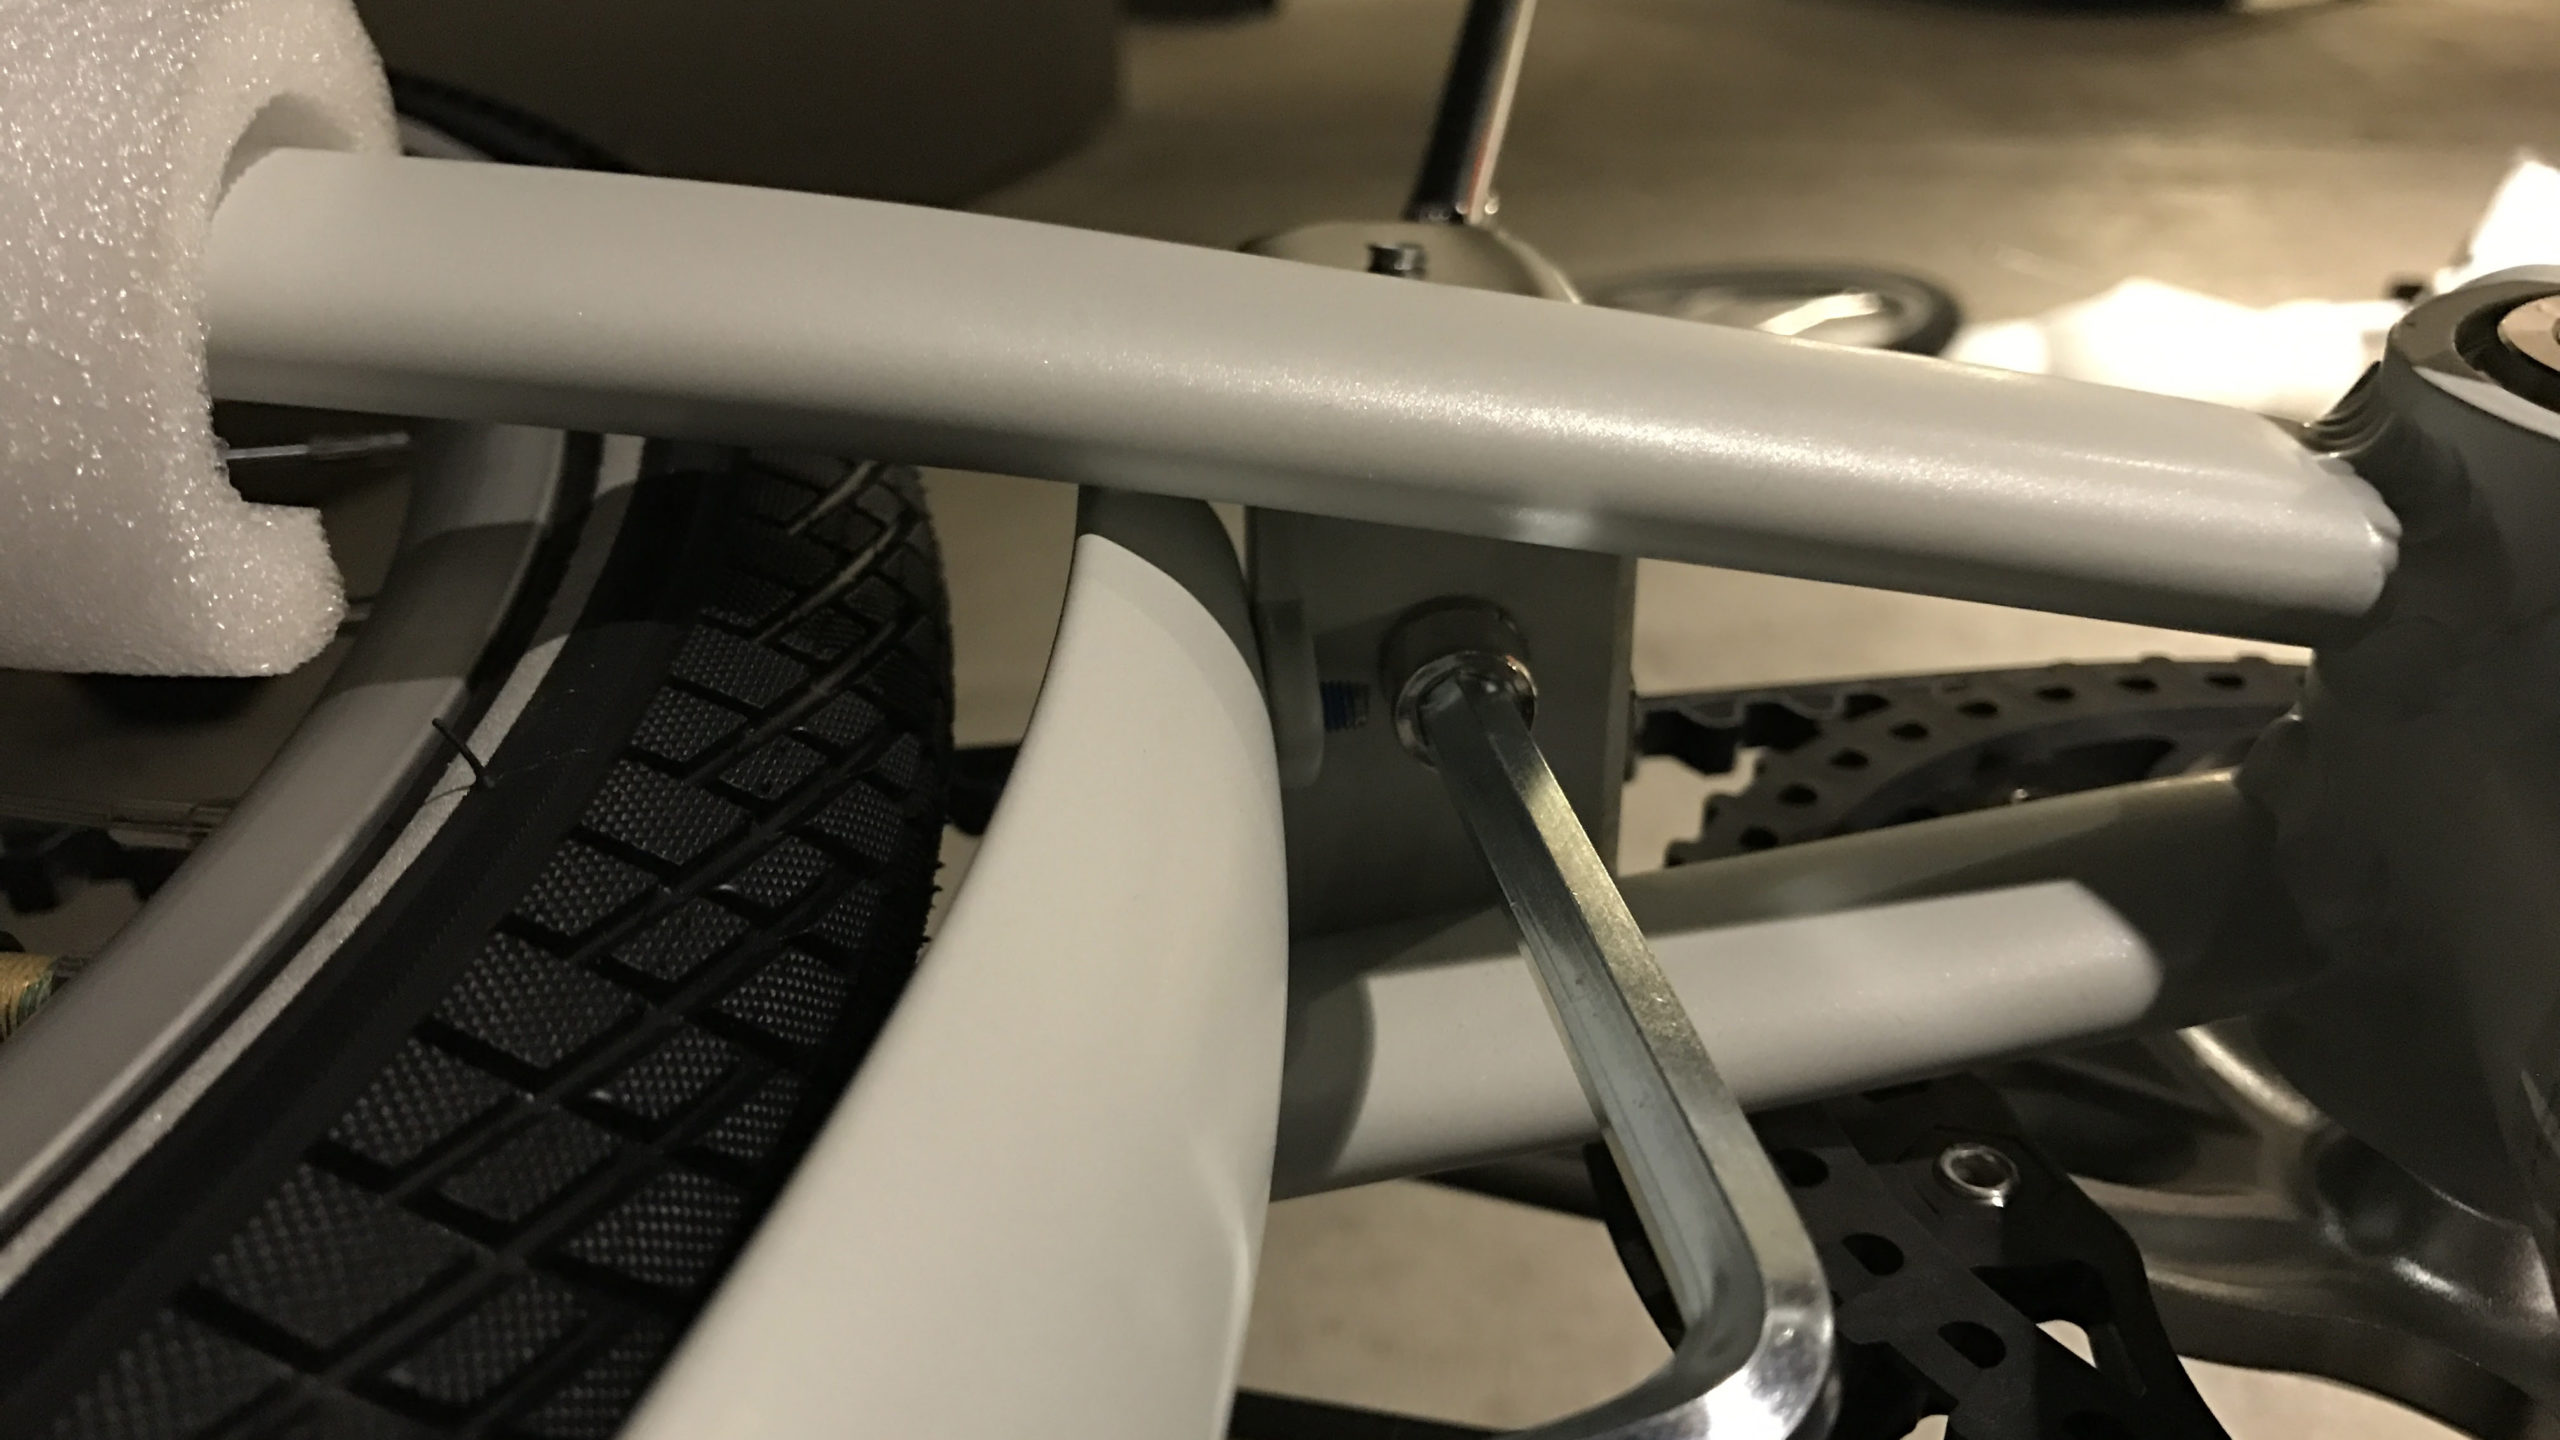 Building The IKEA Bike Is A Pain Worth Suffering Through